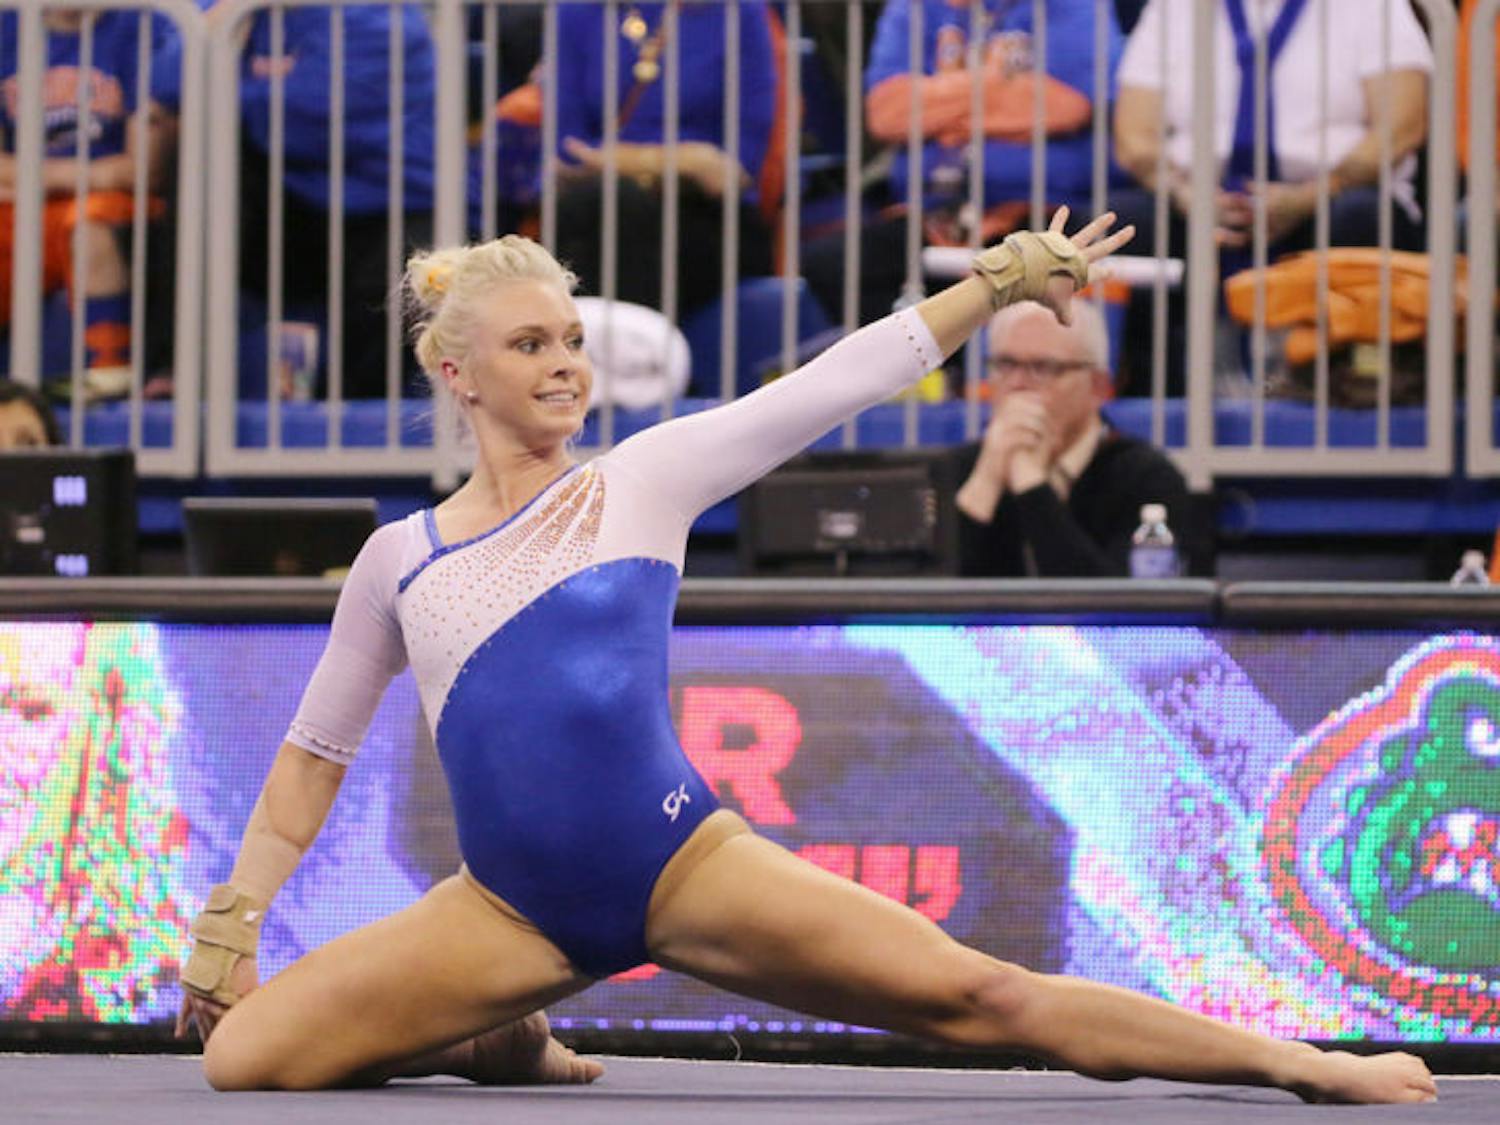 Rachel Spicer performs a floor routine during Florida’s 197.525-196.025 win against Arkansas on Feb. 14 in the O’Connell Center. Coach Rhonda Faehn said Spicer dealt with Achilles tendonitis throughout the season.